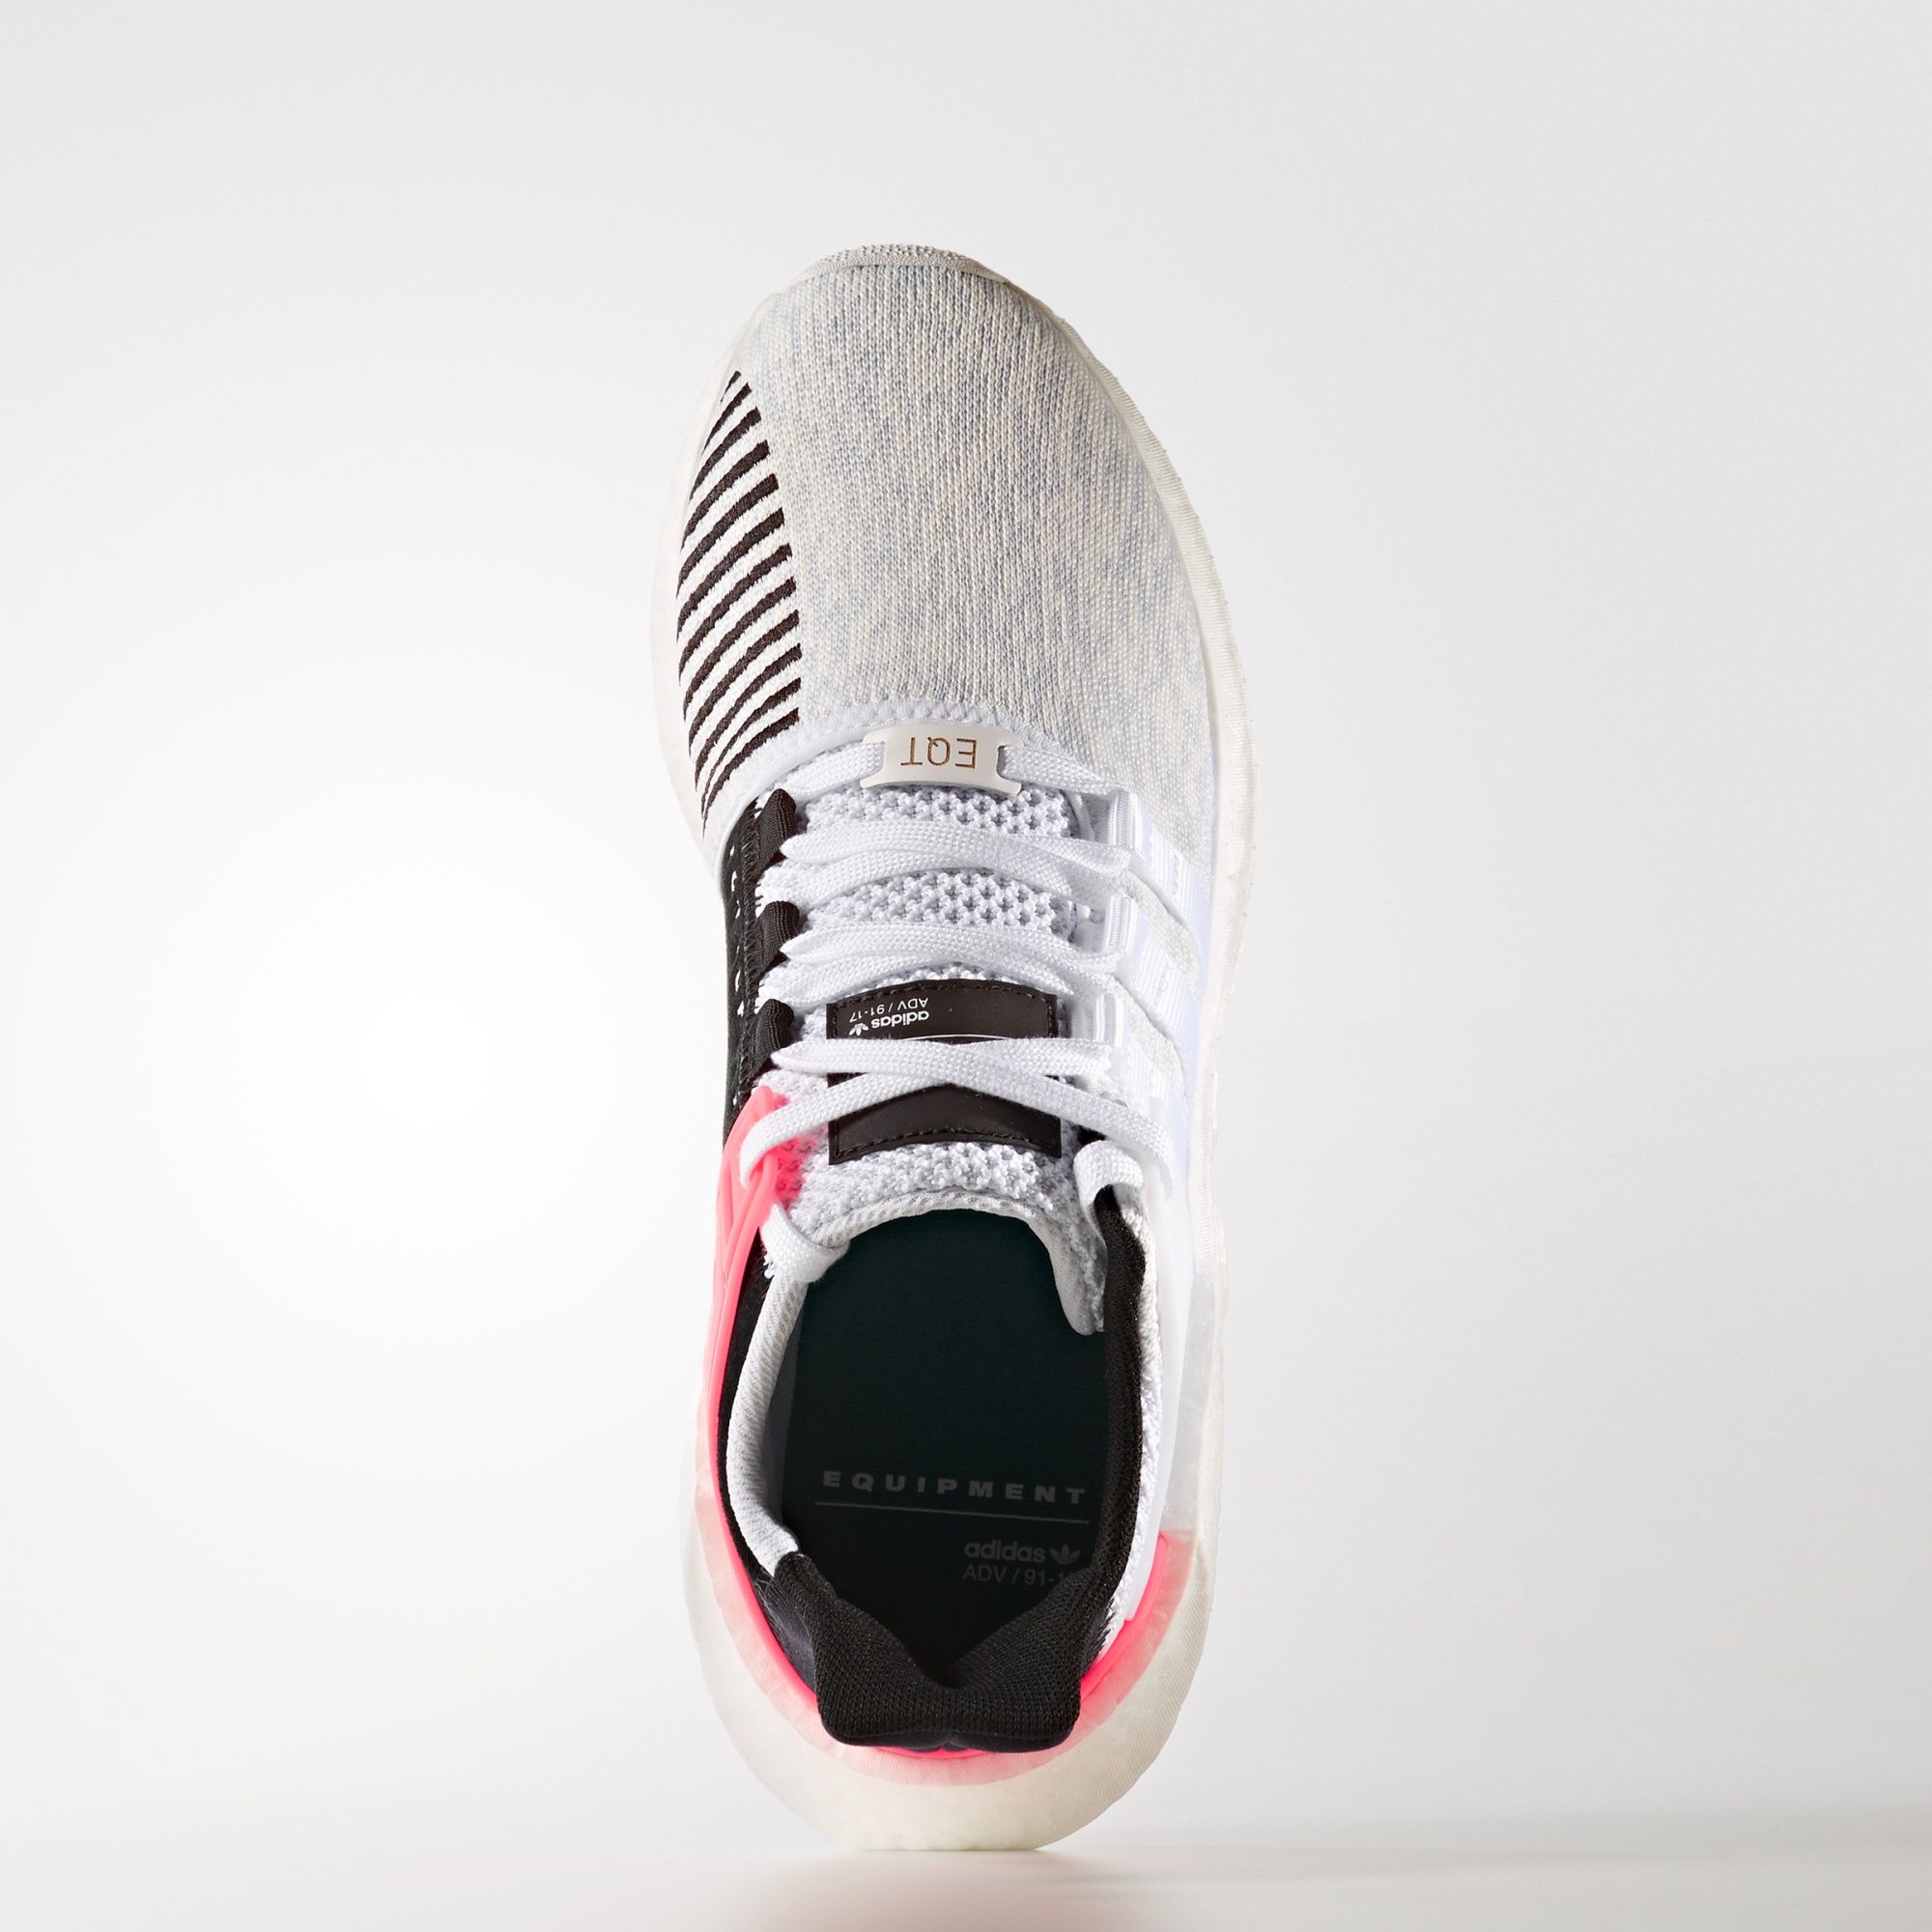 Adidas EQT Support 93/17
Footwear White / Core Black / Turbo